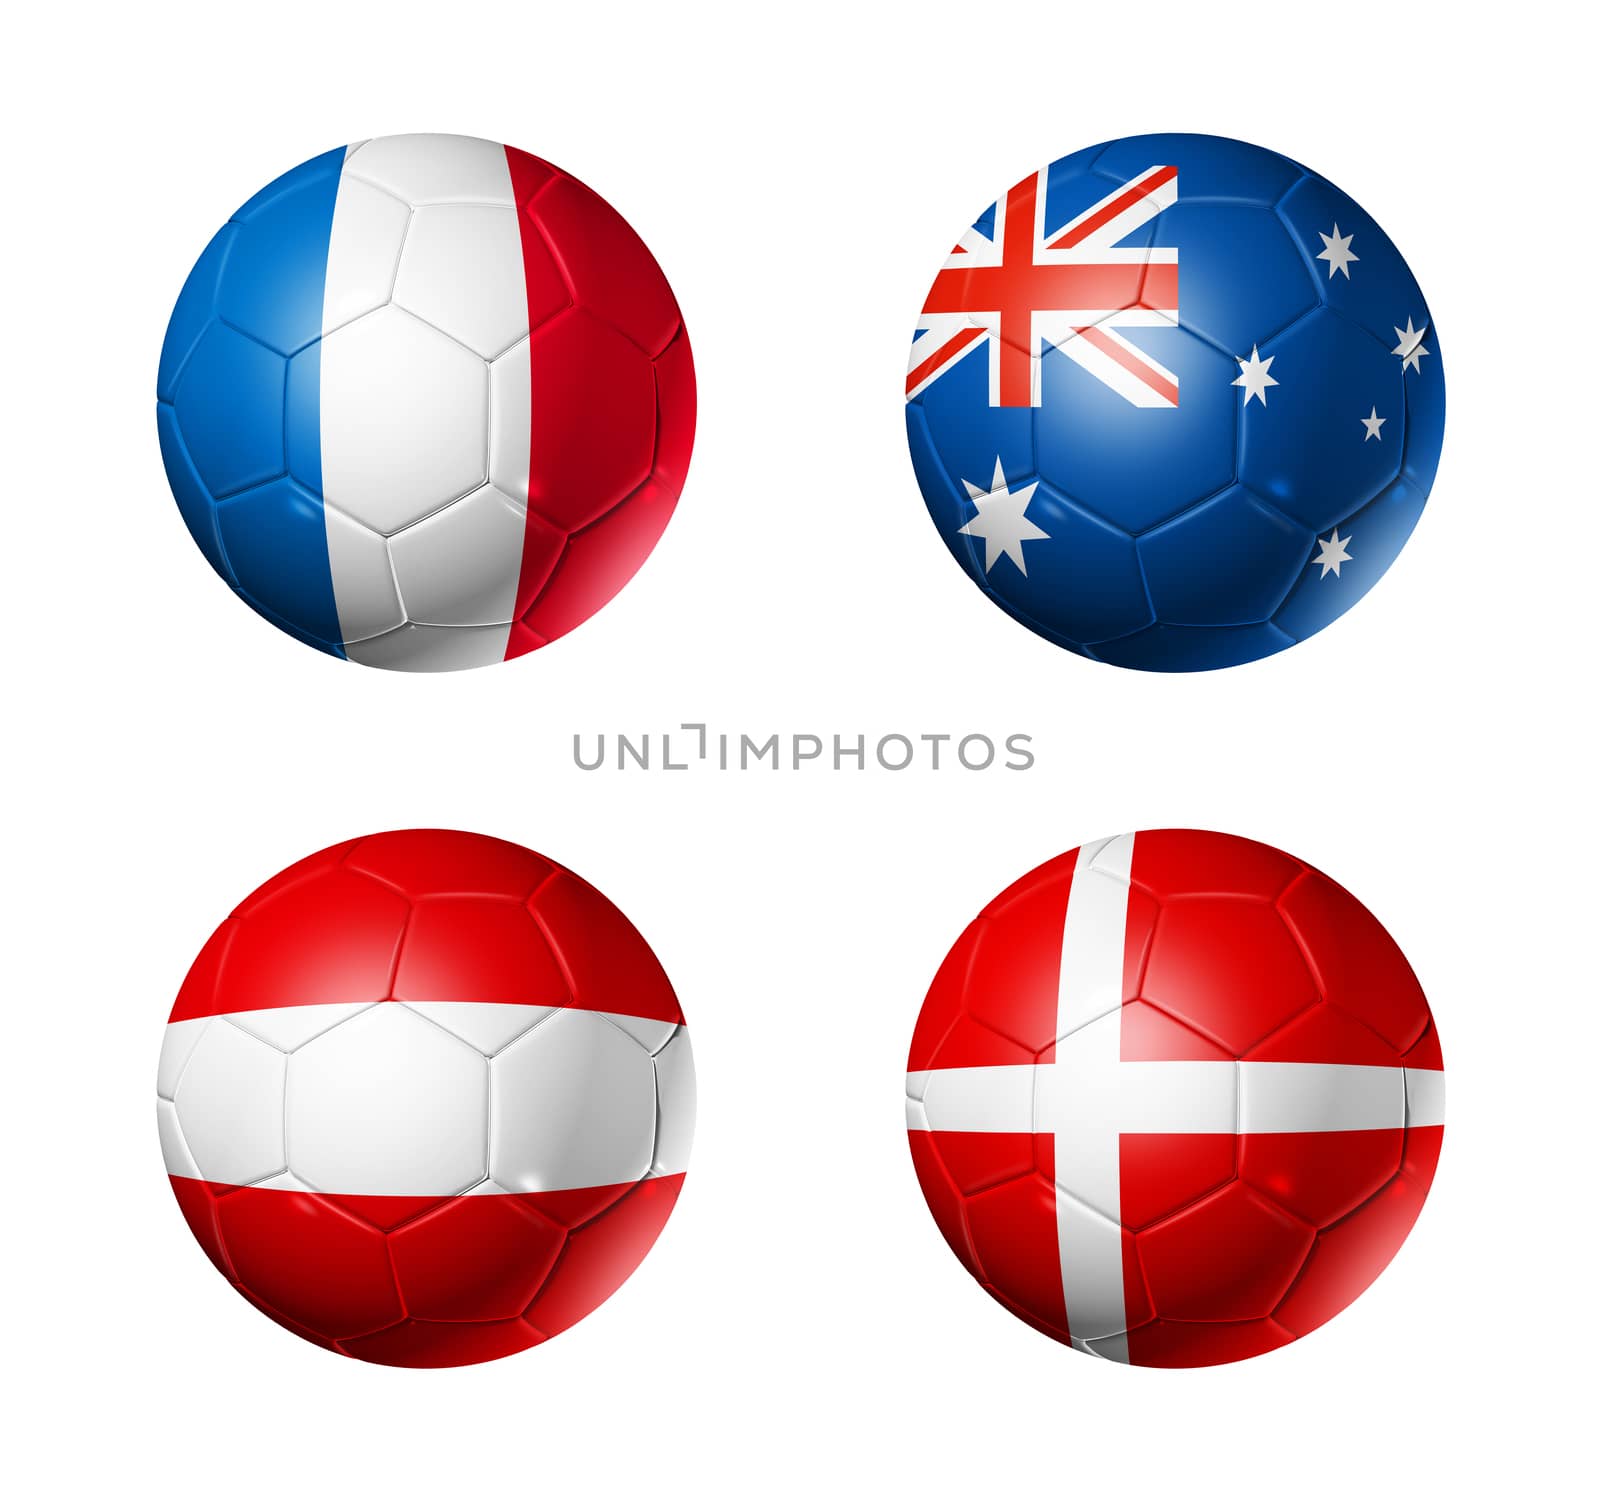 3D soccer balls with group C teams flags, Football competition Russia 2018. isolated on white